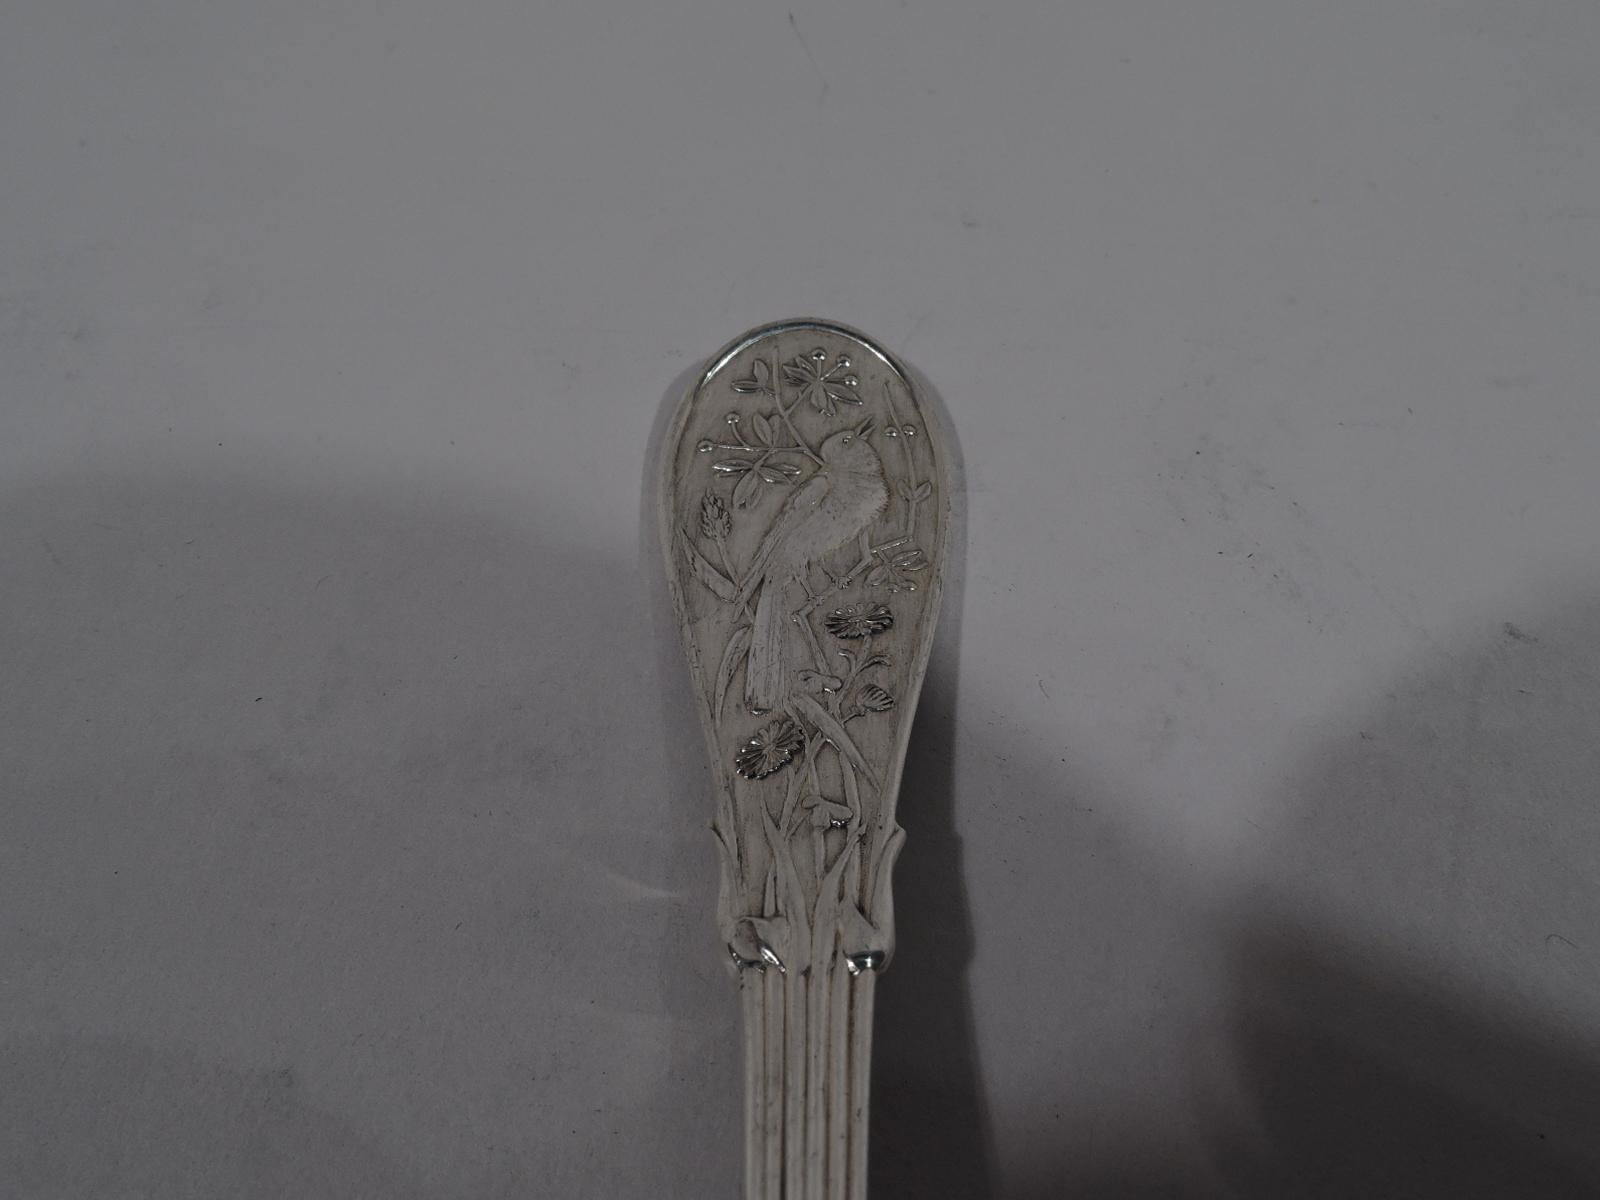 Japanese sterling silver master butter. Made by Tiffany & Co. in New York. Flat handle with double-sided reeding that terminates in flower stems on terminal. On terminal front is perched bird. Terminal back vacant with flower on heel. Blade has